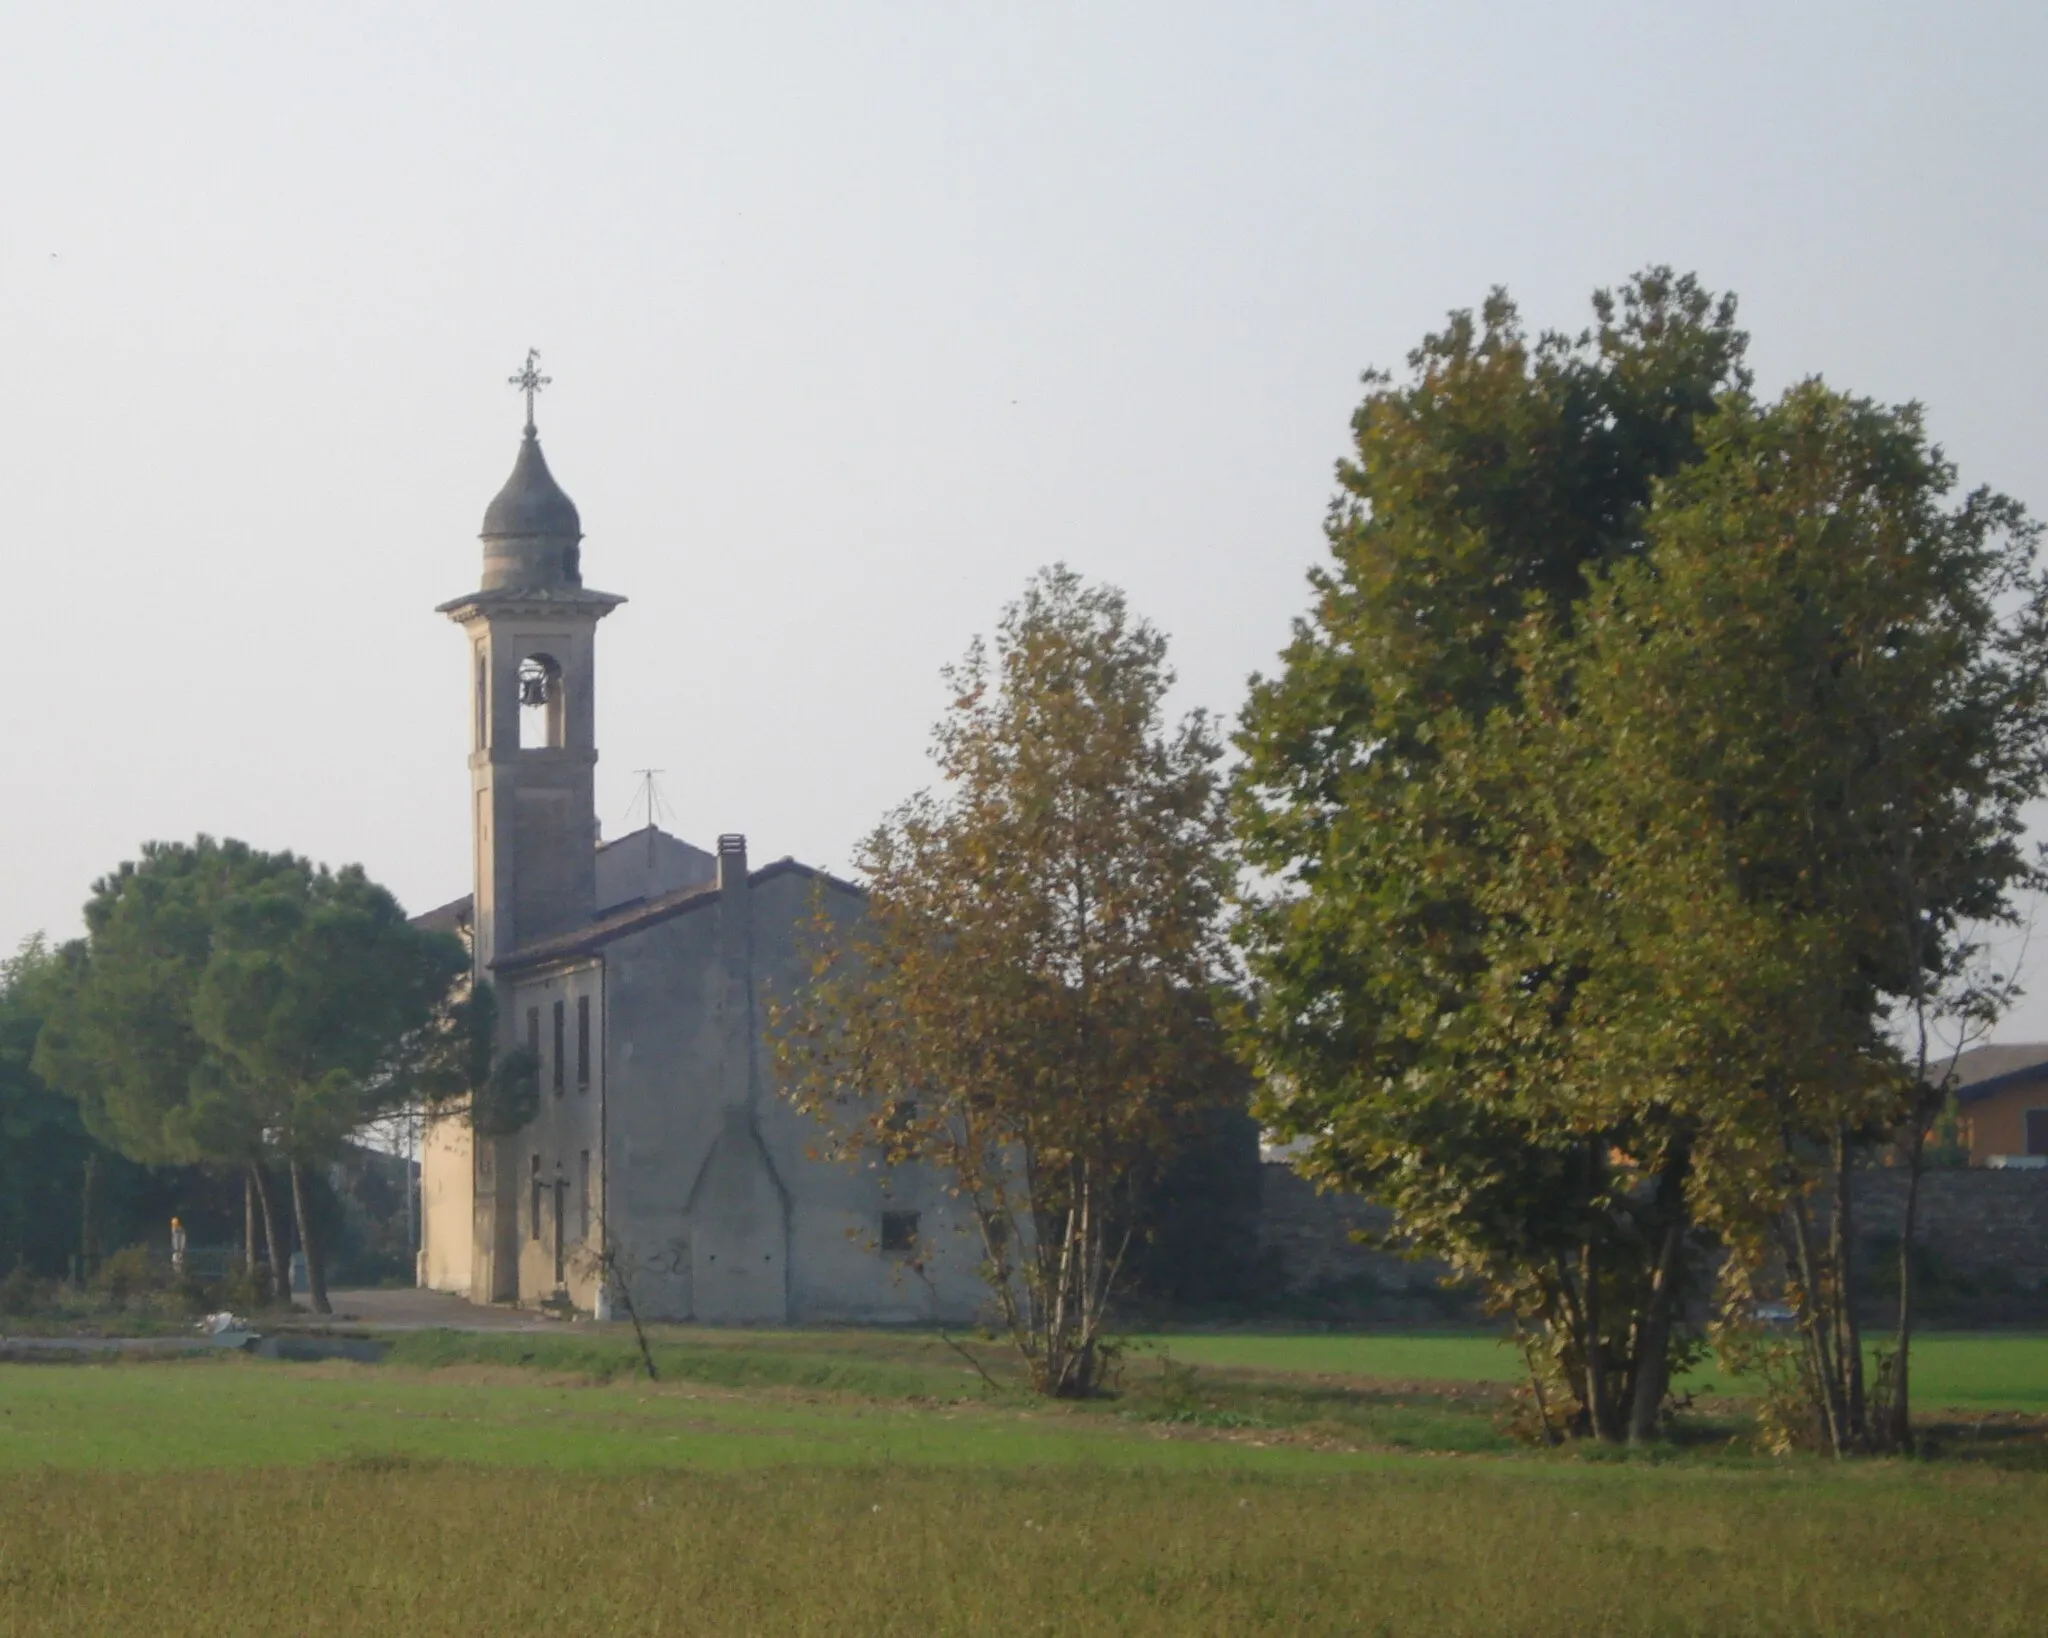 Photo showing: The church in Gottolengo of Incidella